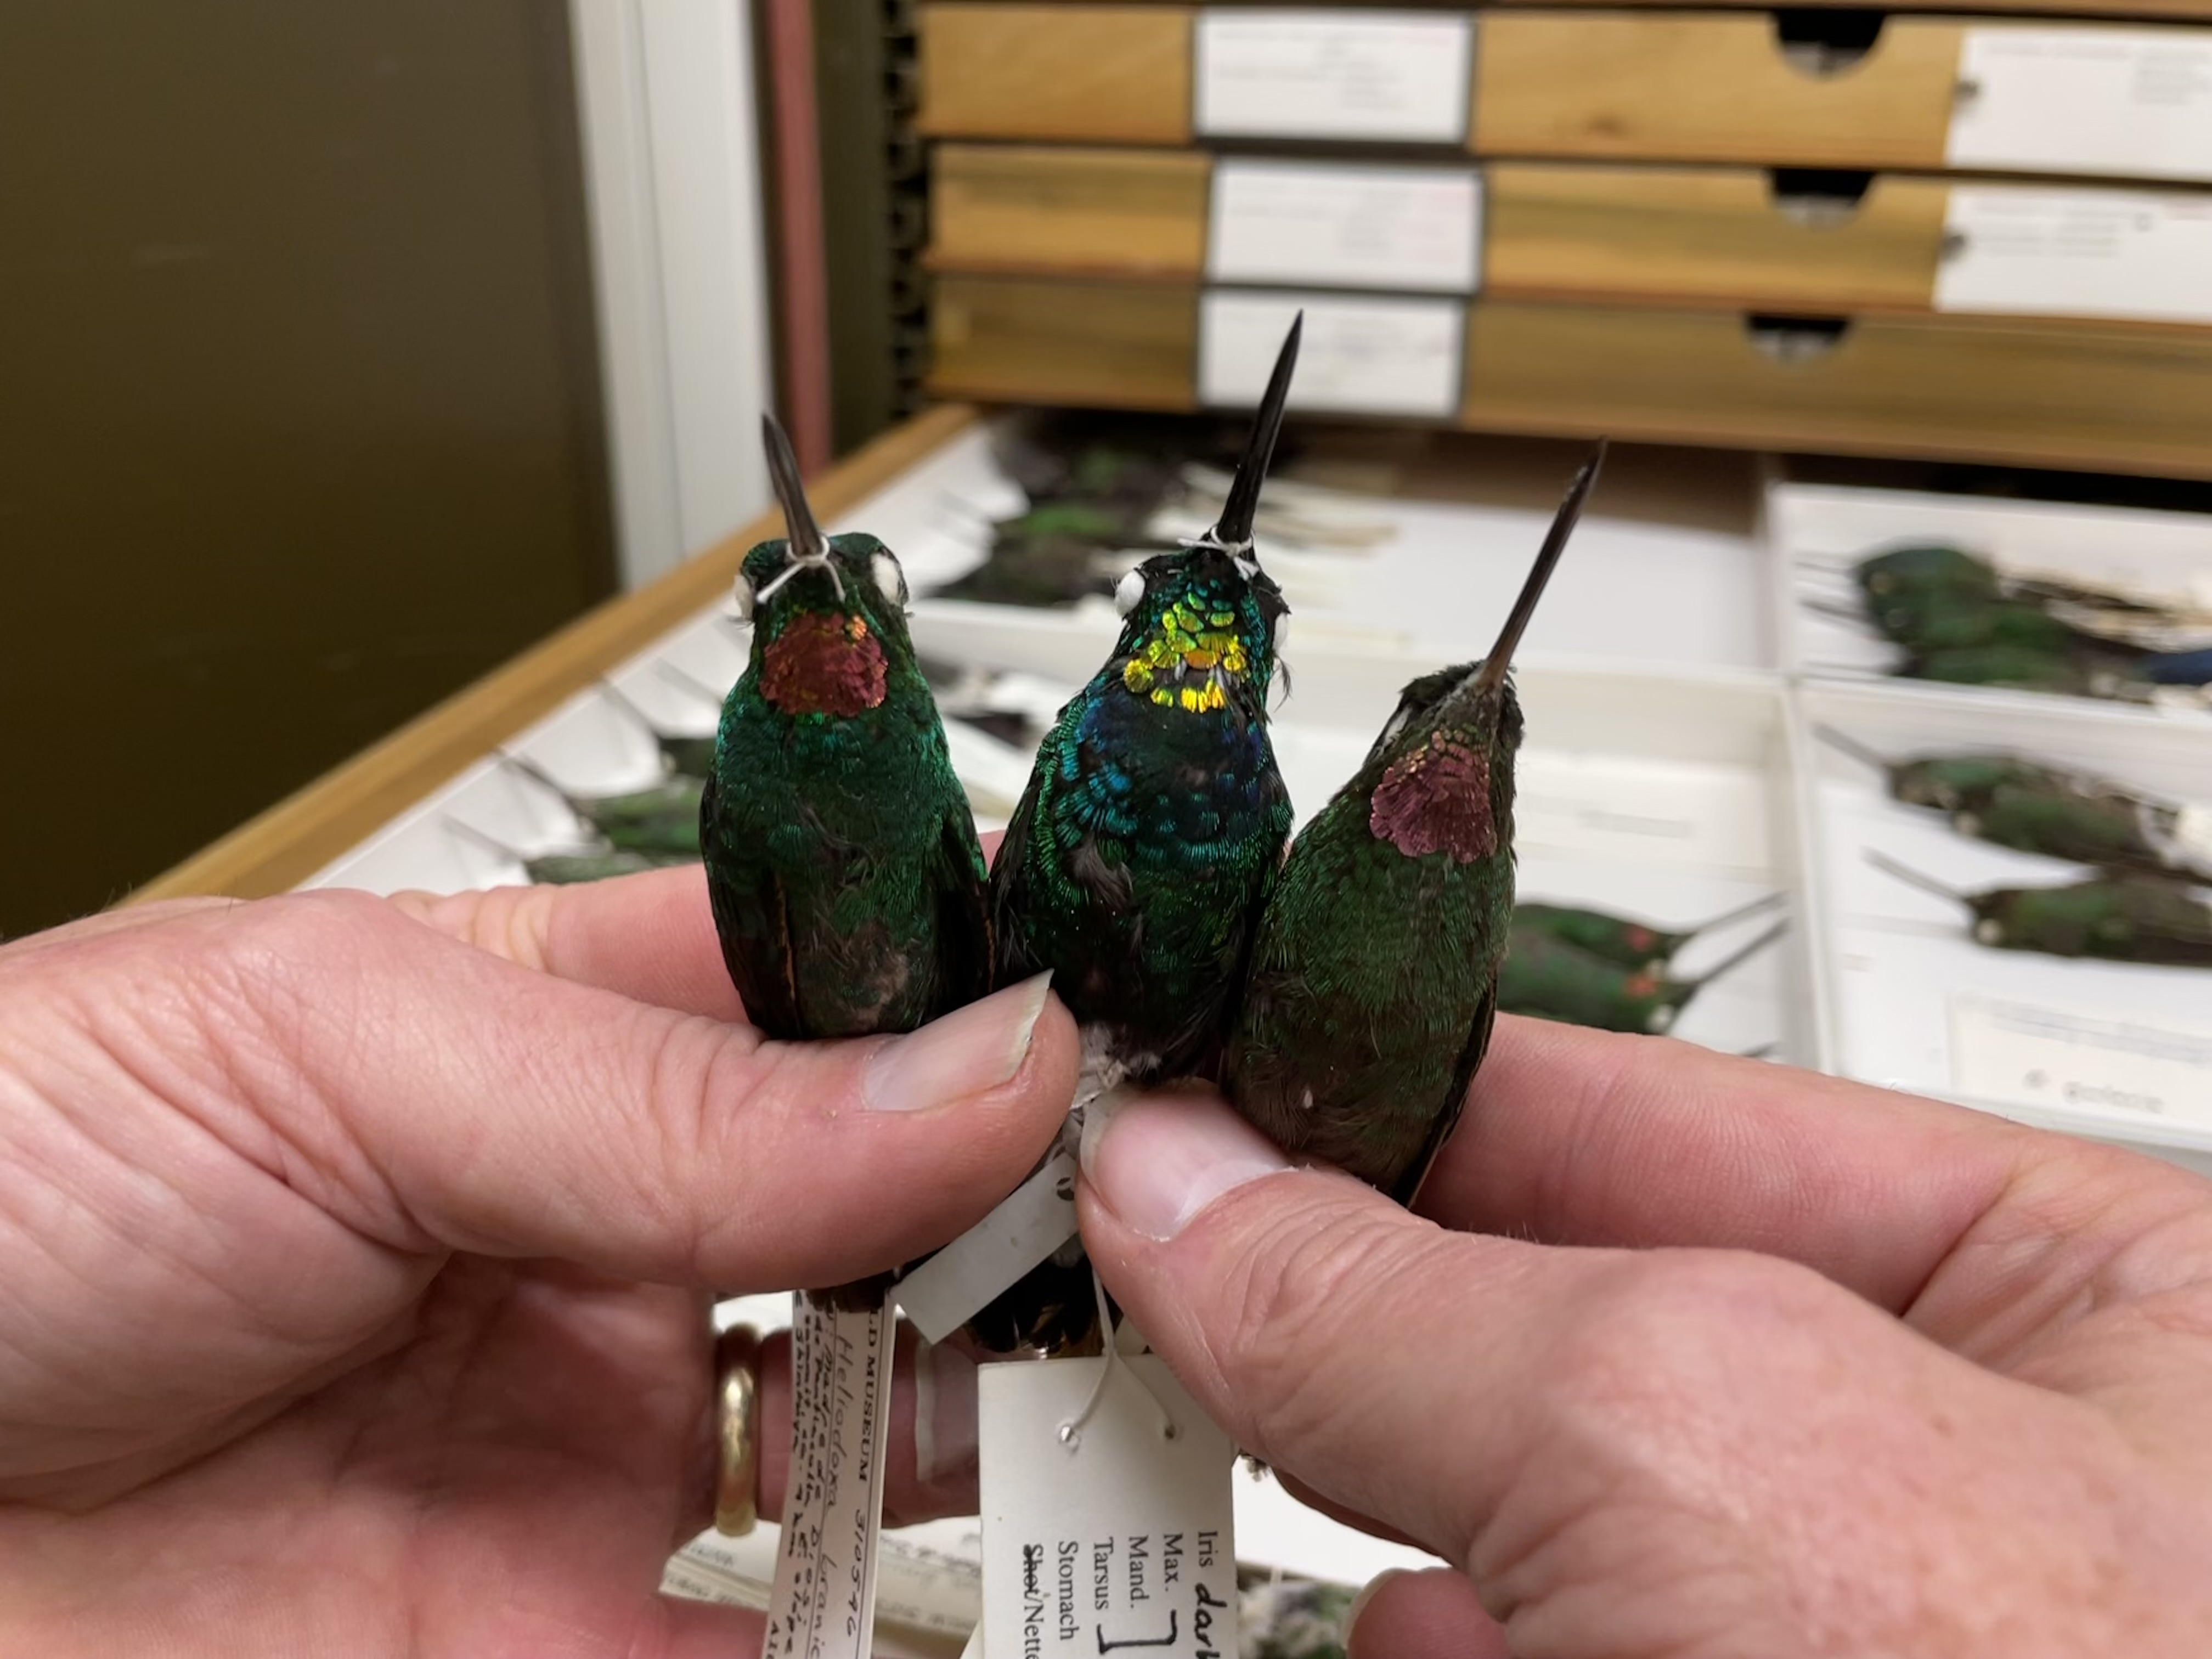 Three hummingbird specimens being held in a person's fingers. Museum collections drawers can be seen slightly blurred behind.